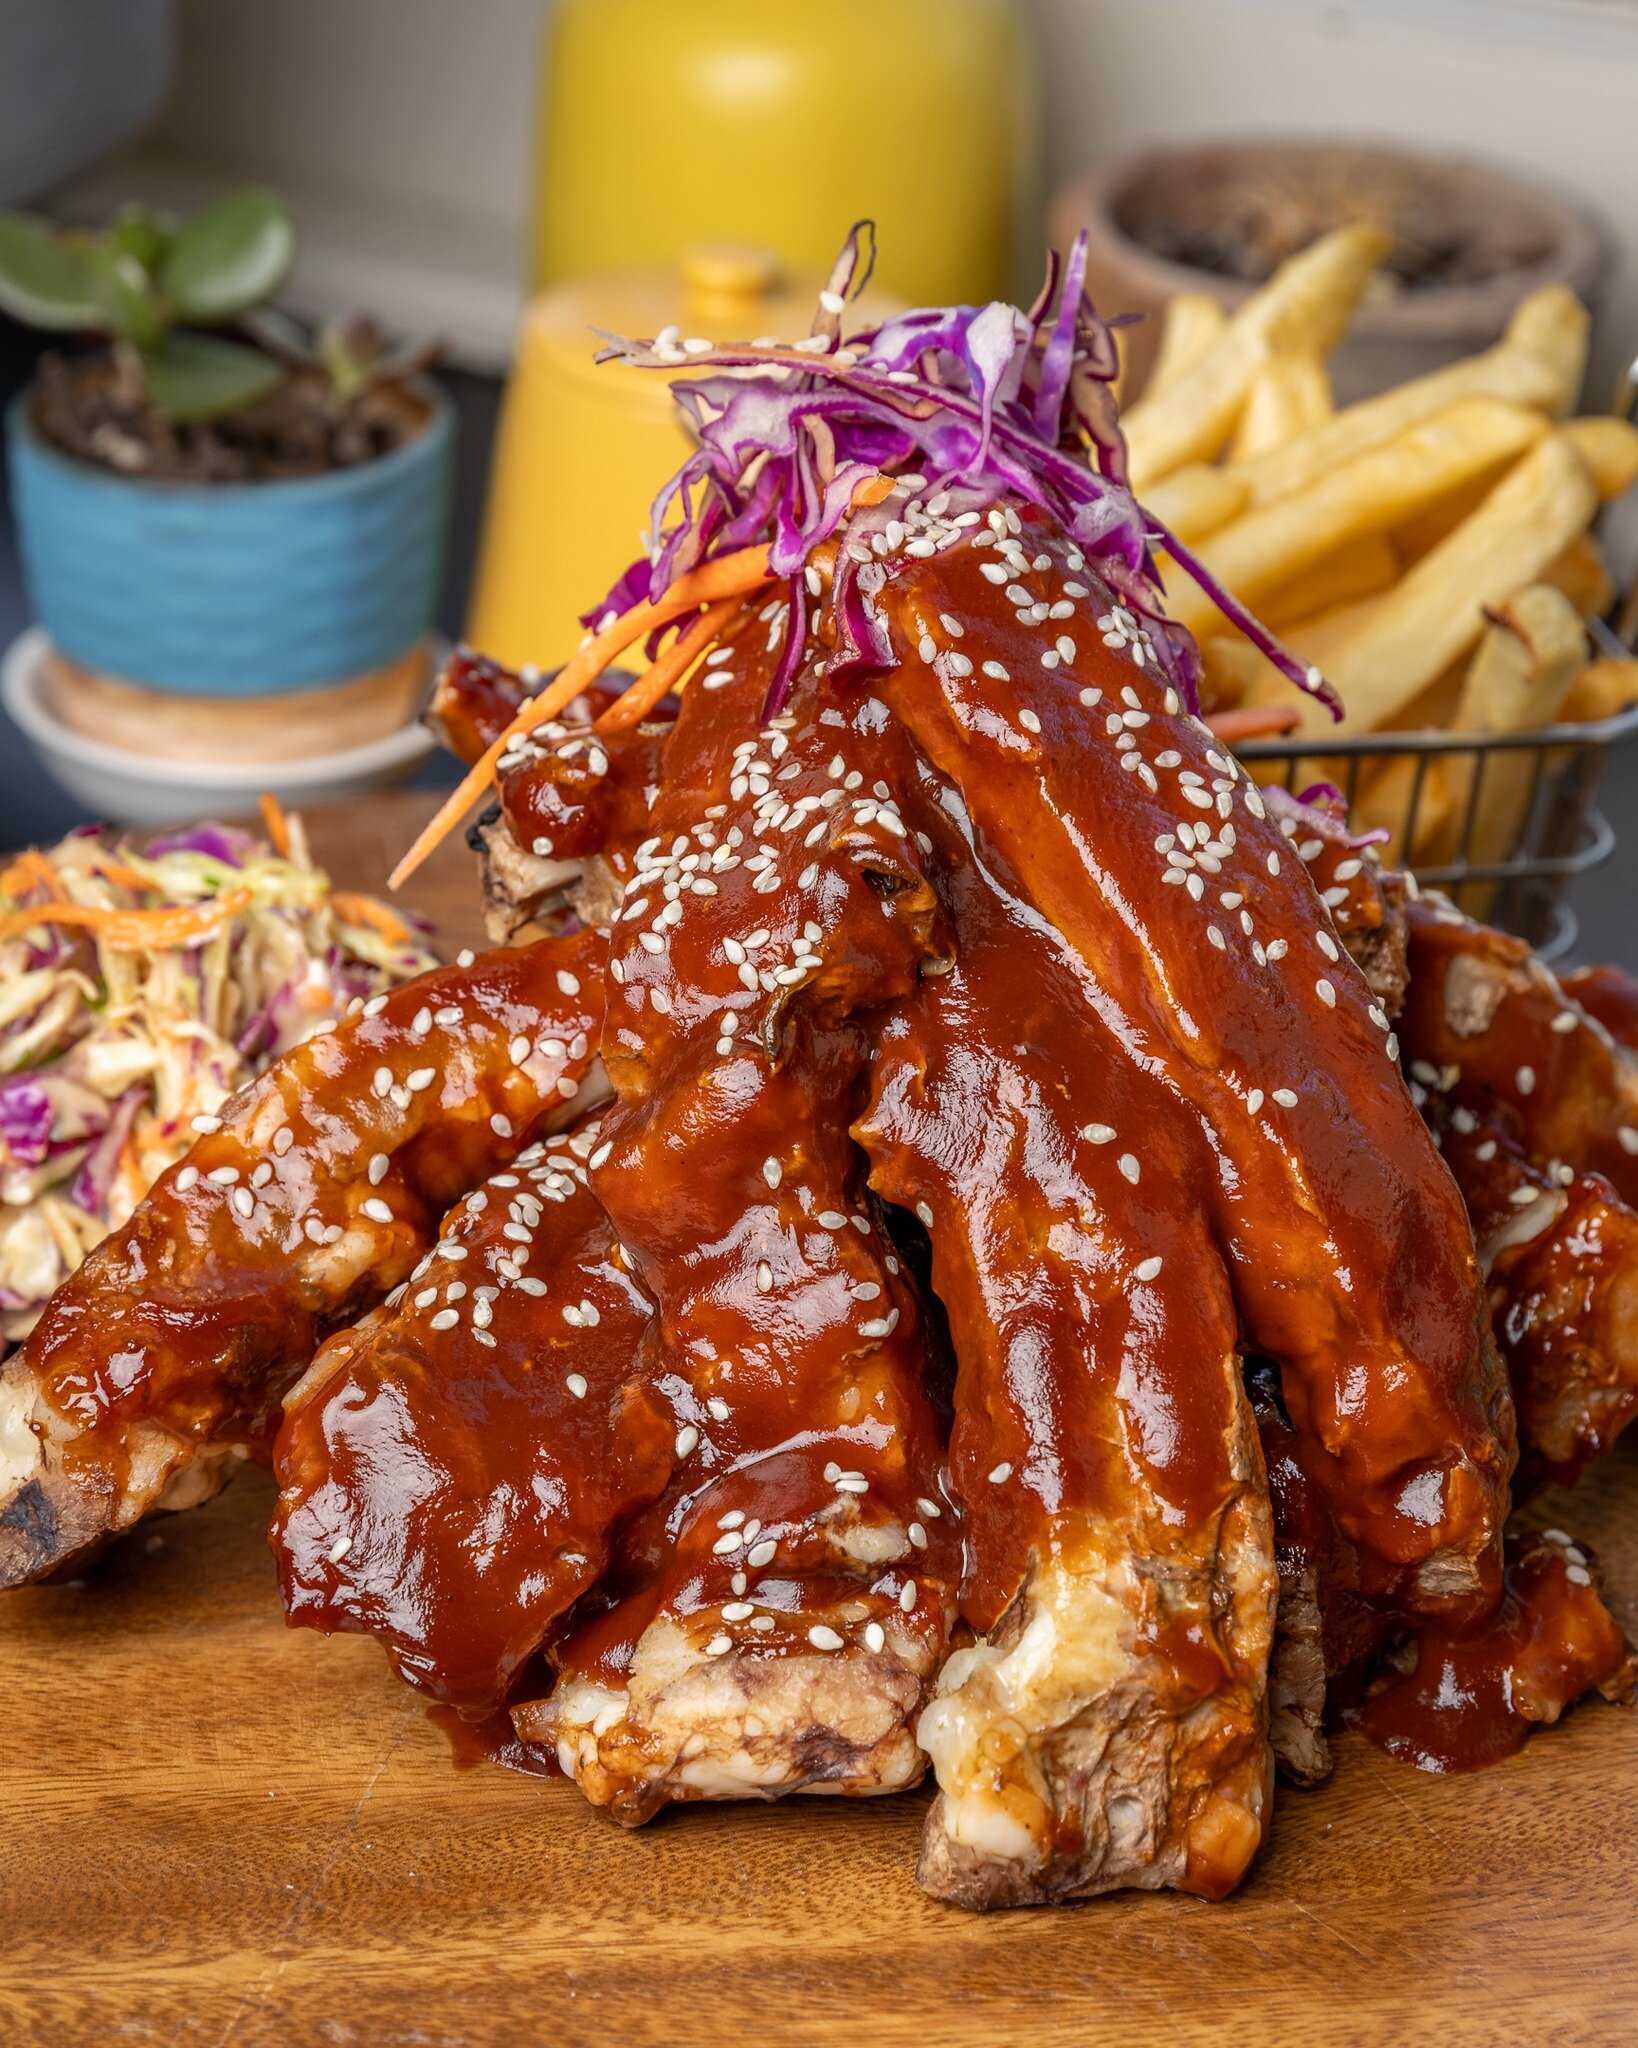 Get your tender and saucy Sticky Cola Bourbon BBQ Pork Ribs in a half rack or whole rack serving 🍖 Accompanied by slaw and fries 🍟

🚨 TUESDAY SPECIAL 🚨 Half rack of ribs just $25!

Only at your home away from home in Mt Eden 🏡 View our menu and 